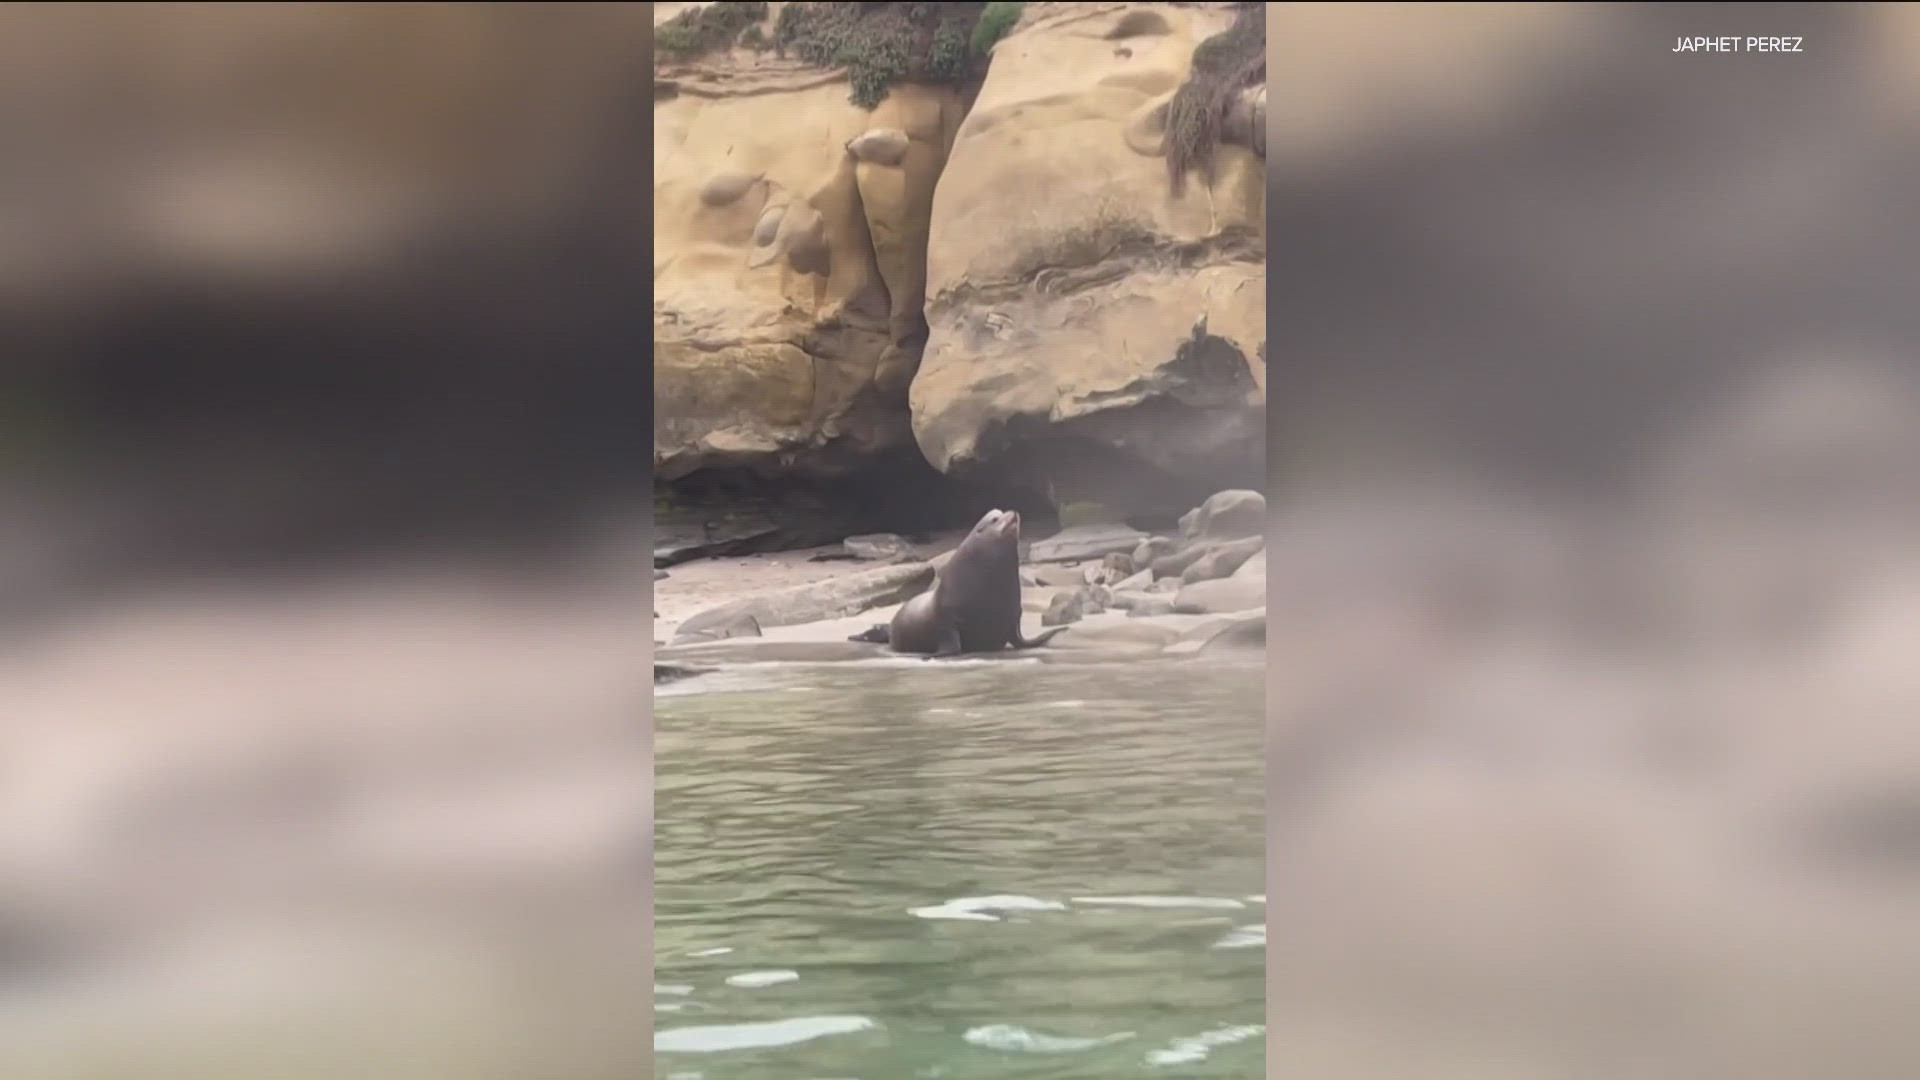 Guest commentary: More seals and sea lions in La Jolla could be a